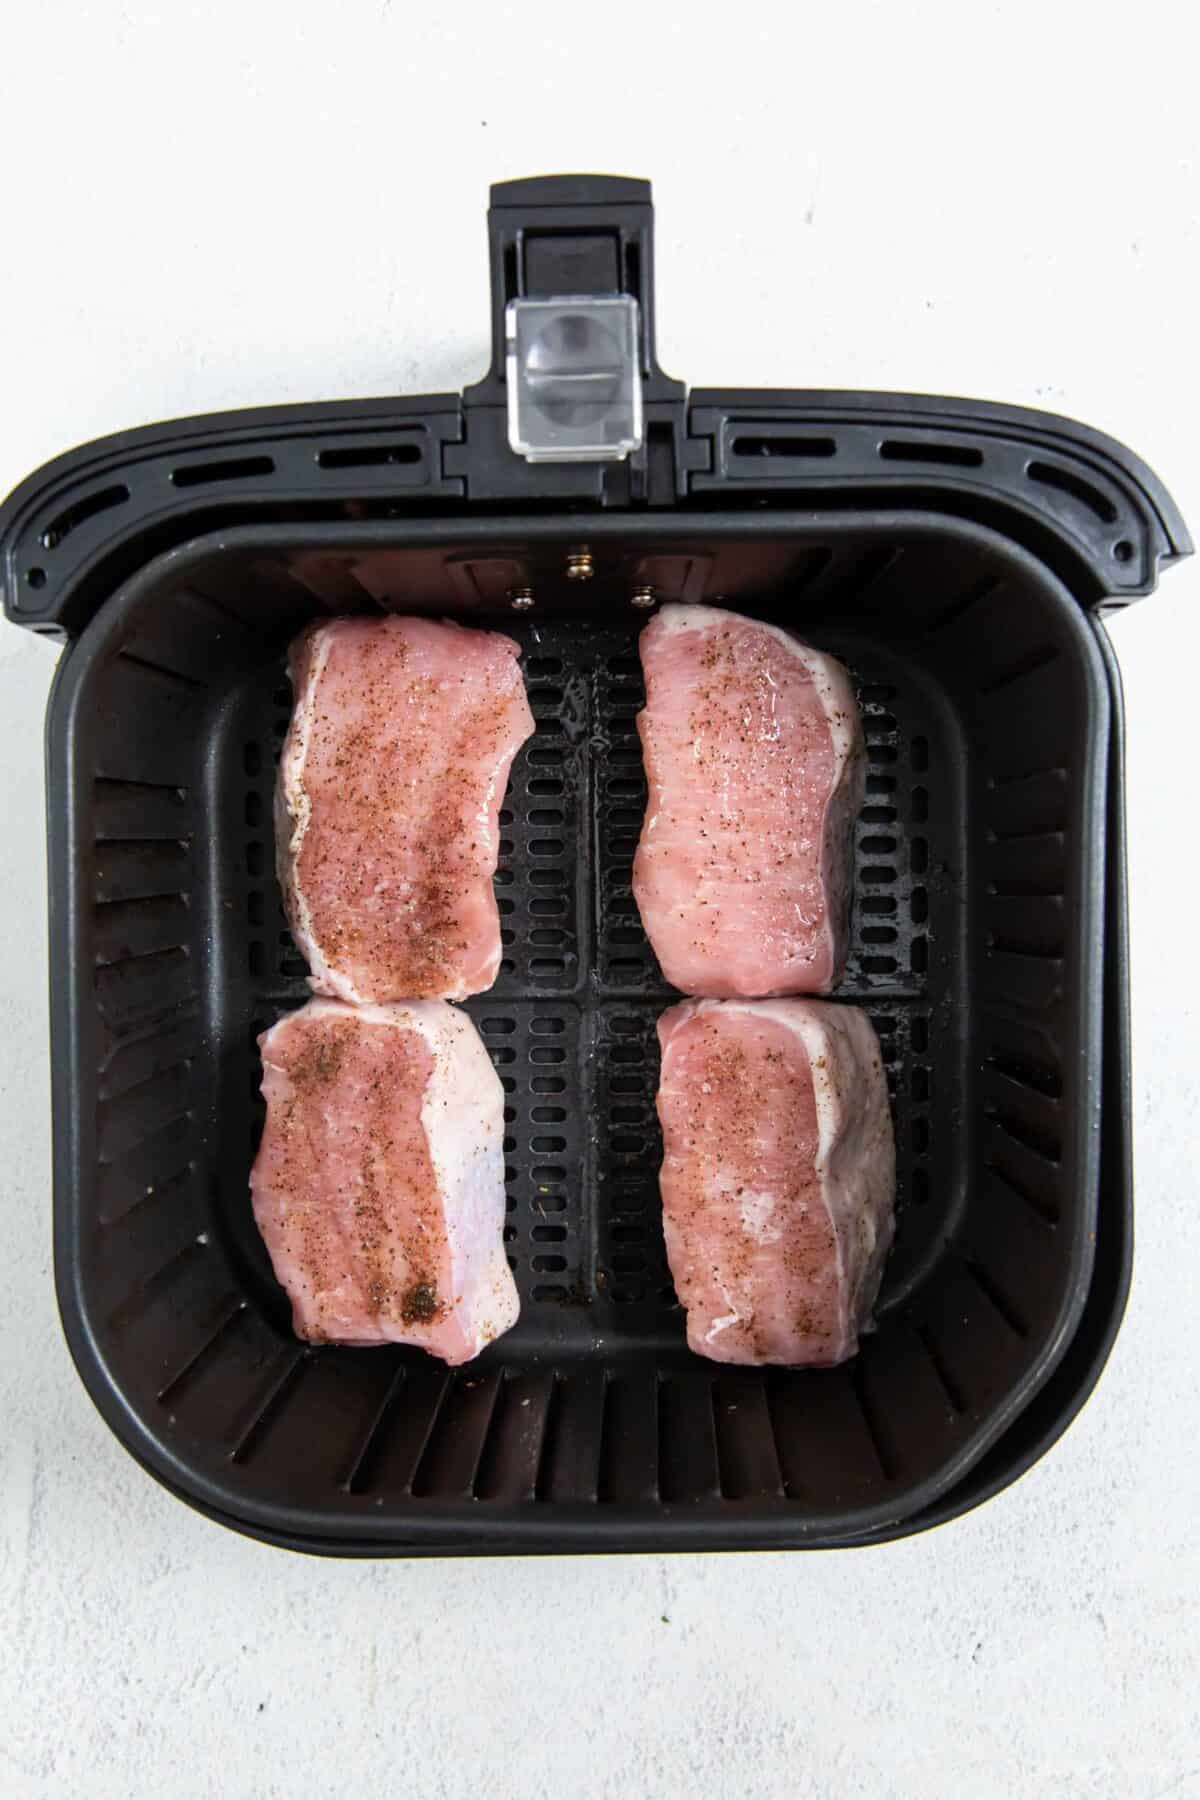 Seasoned pork chops placed in the air fryer in a single layer.